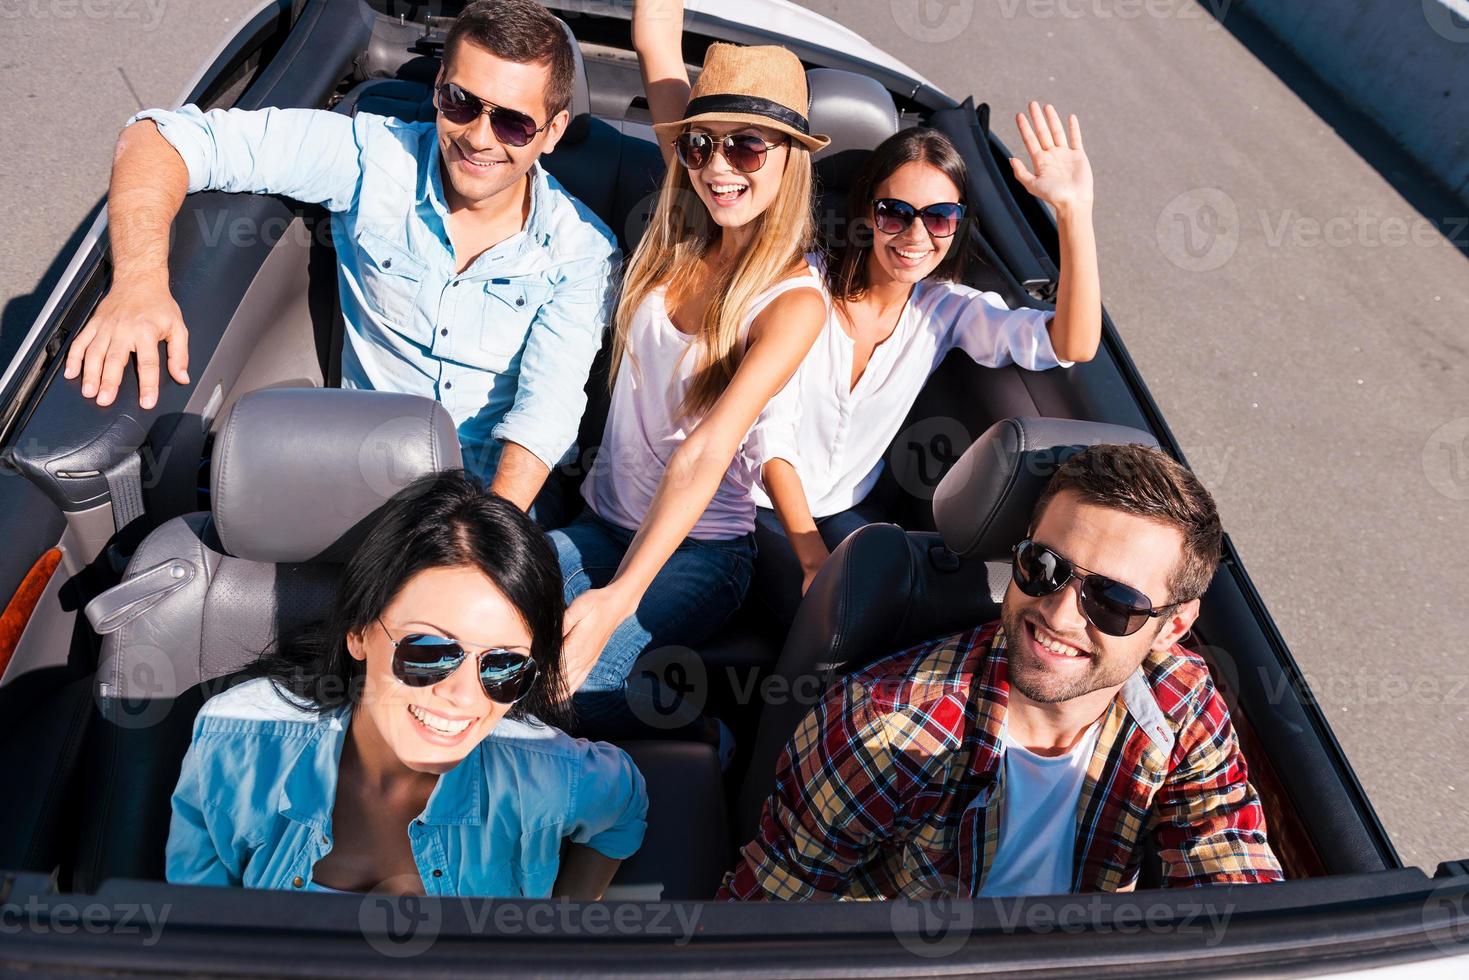 We always travel together. Top view of young happy people enjoying road trip in their white convertible and raising their arms photo